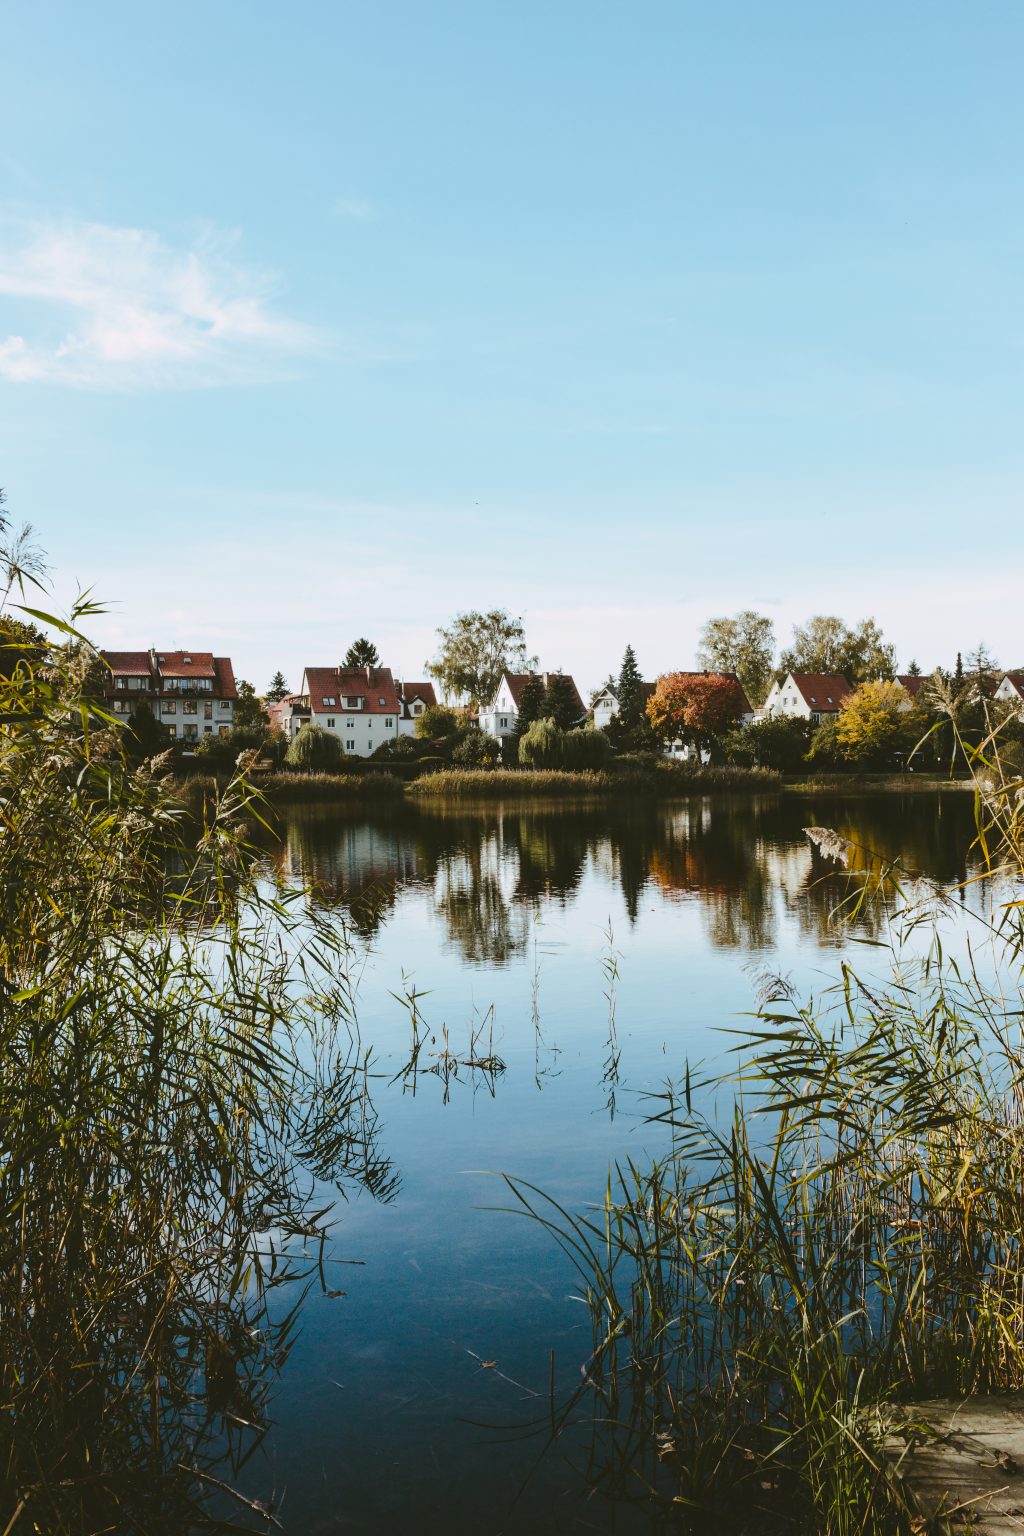 Apartment complex by the lake 3 - free stock photo